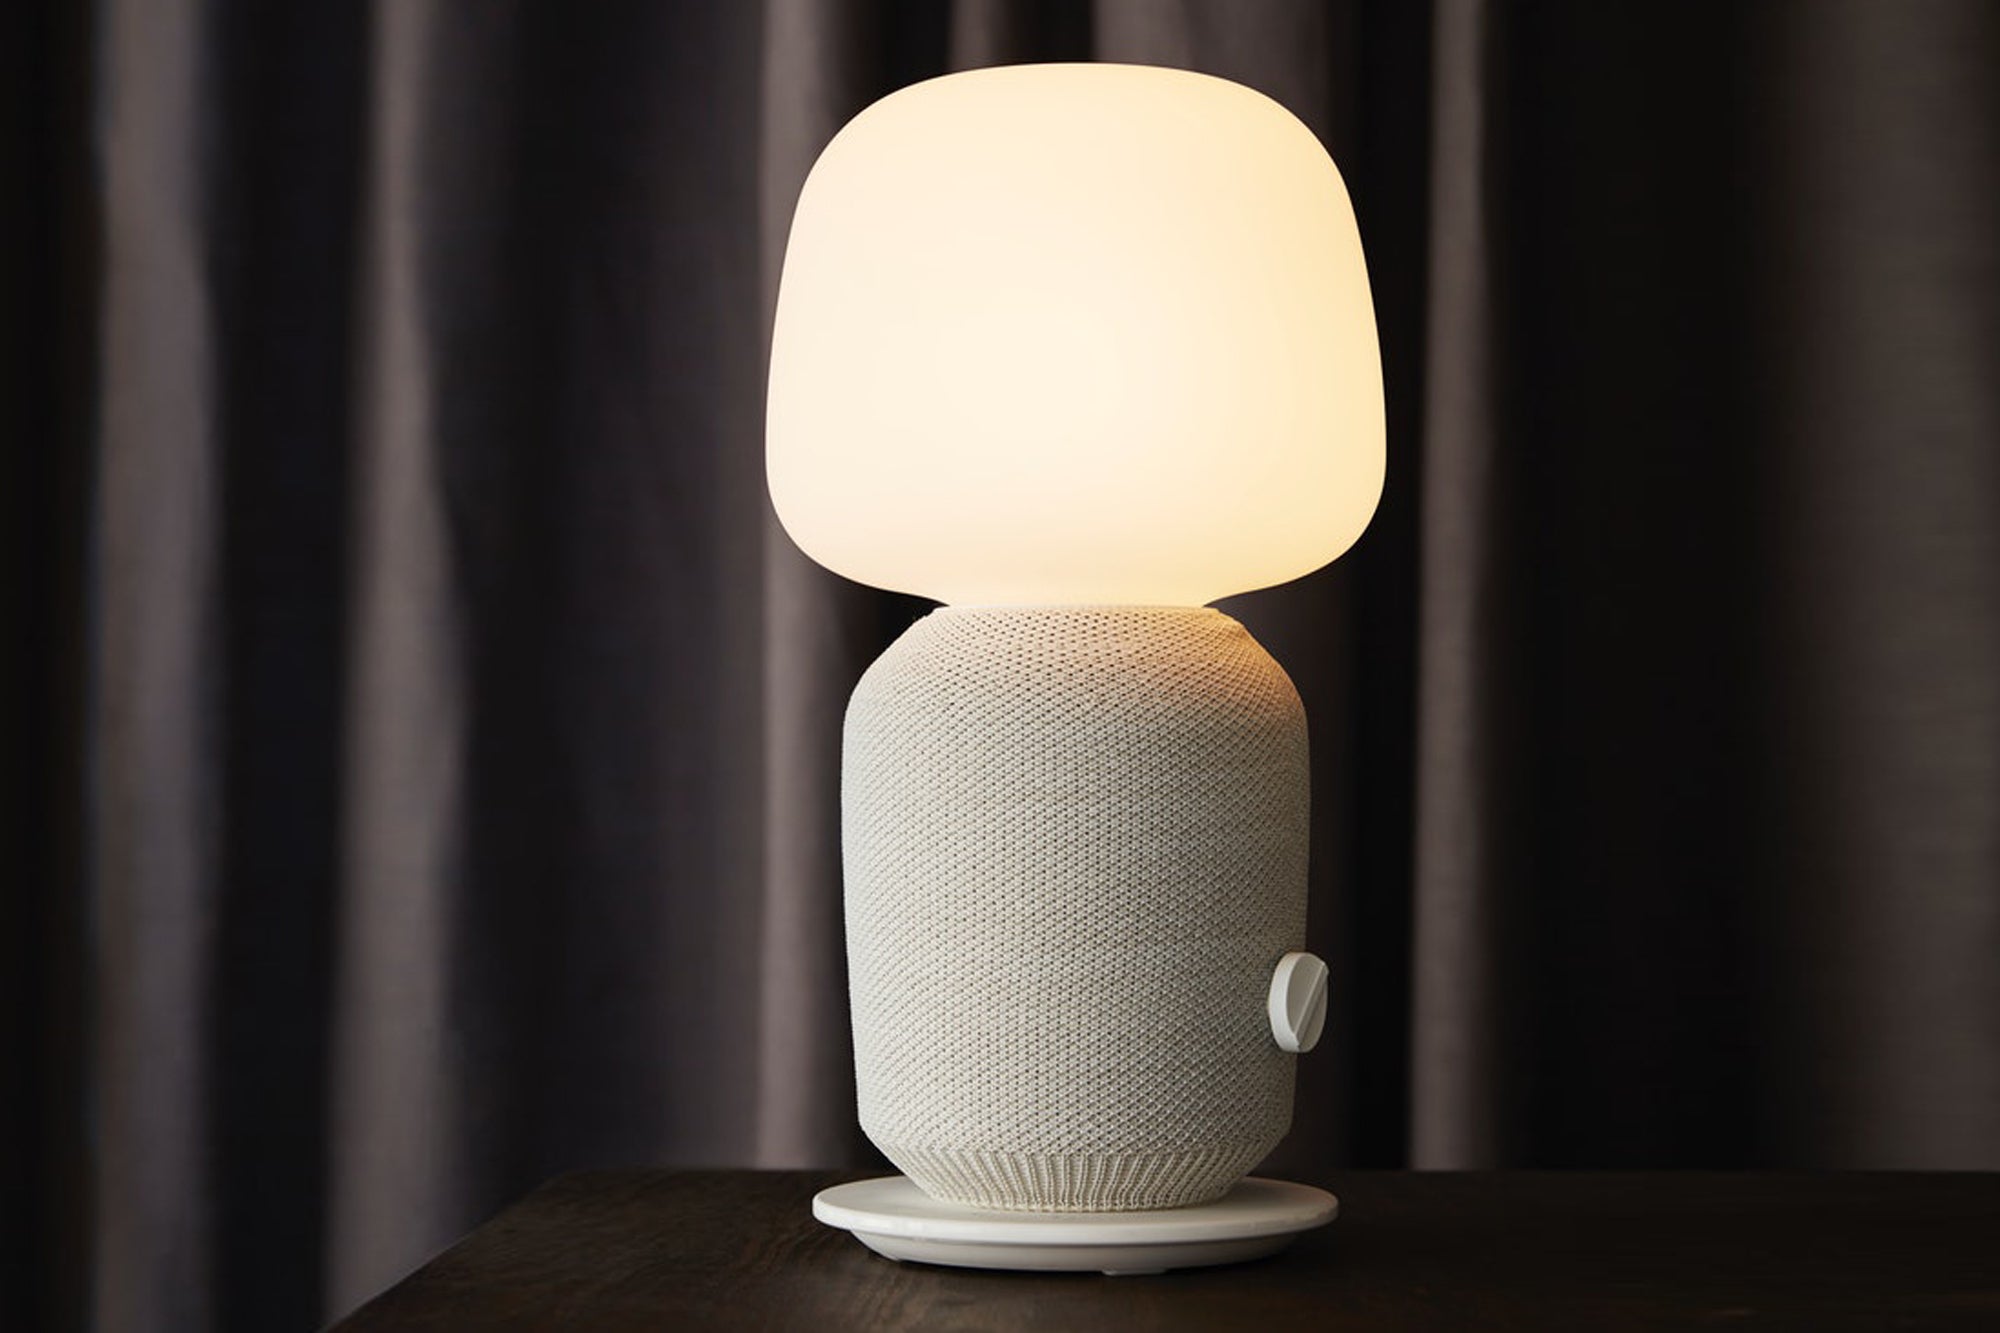 IKEA Symfonisk speakers review: Sonos made sure they sound great, but